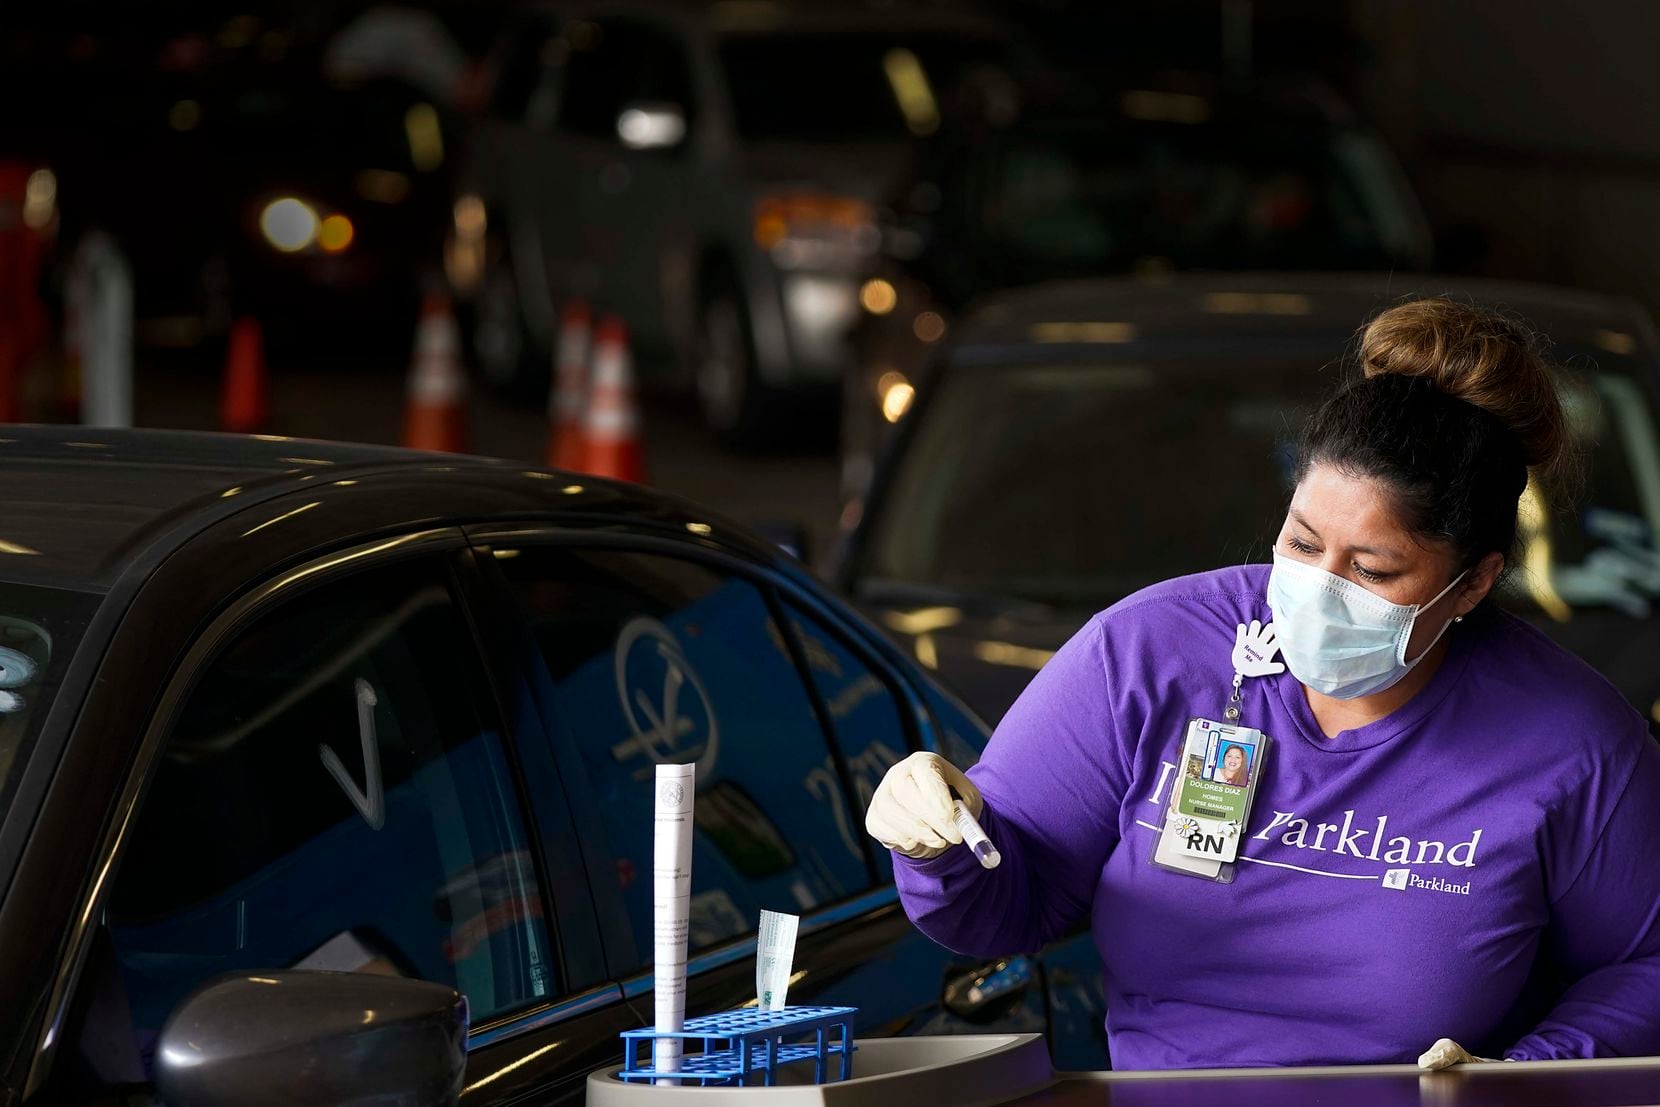 Parkland Homeless Outreach Medical Services (HOMES) program nurse manager Dolores Diaz prepares testing materials at a COVID-19 drive-through testing site at American Airlines Center on Monday, April 20, 2020, in Dallas. (Smiley N. Pool/The Dallas Morning News)